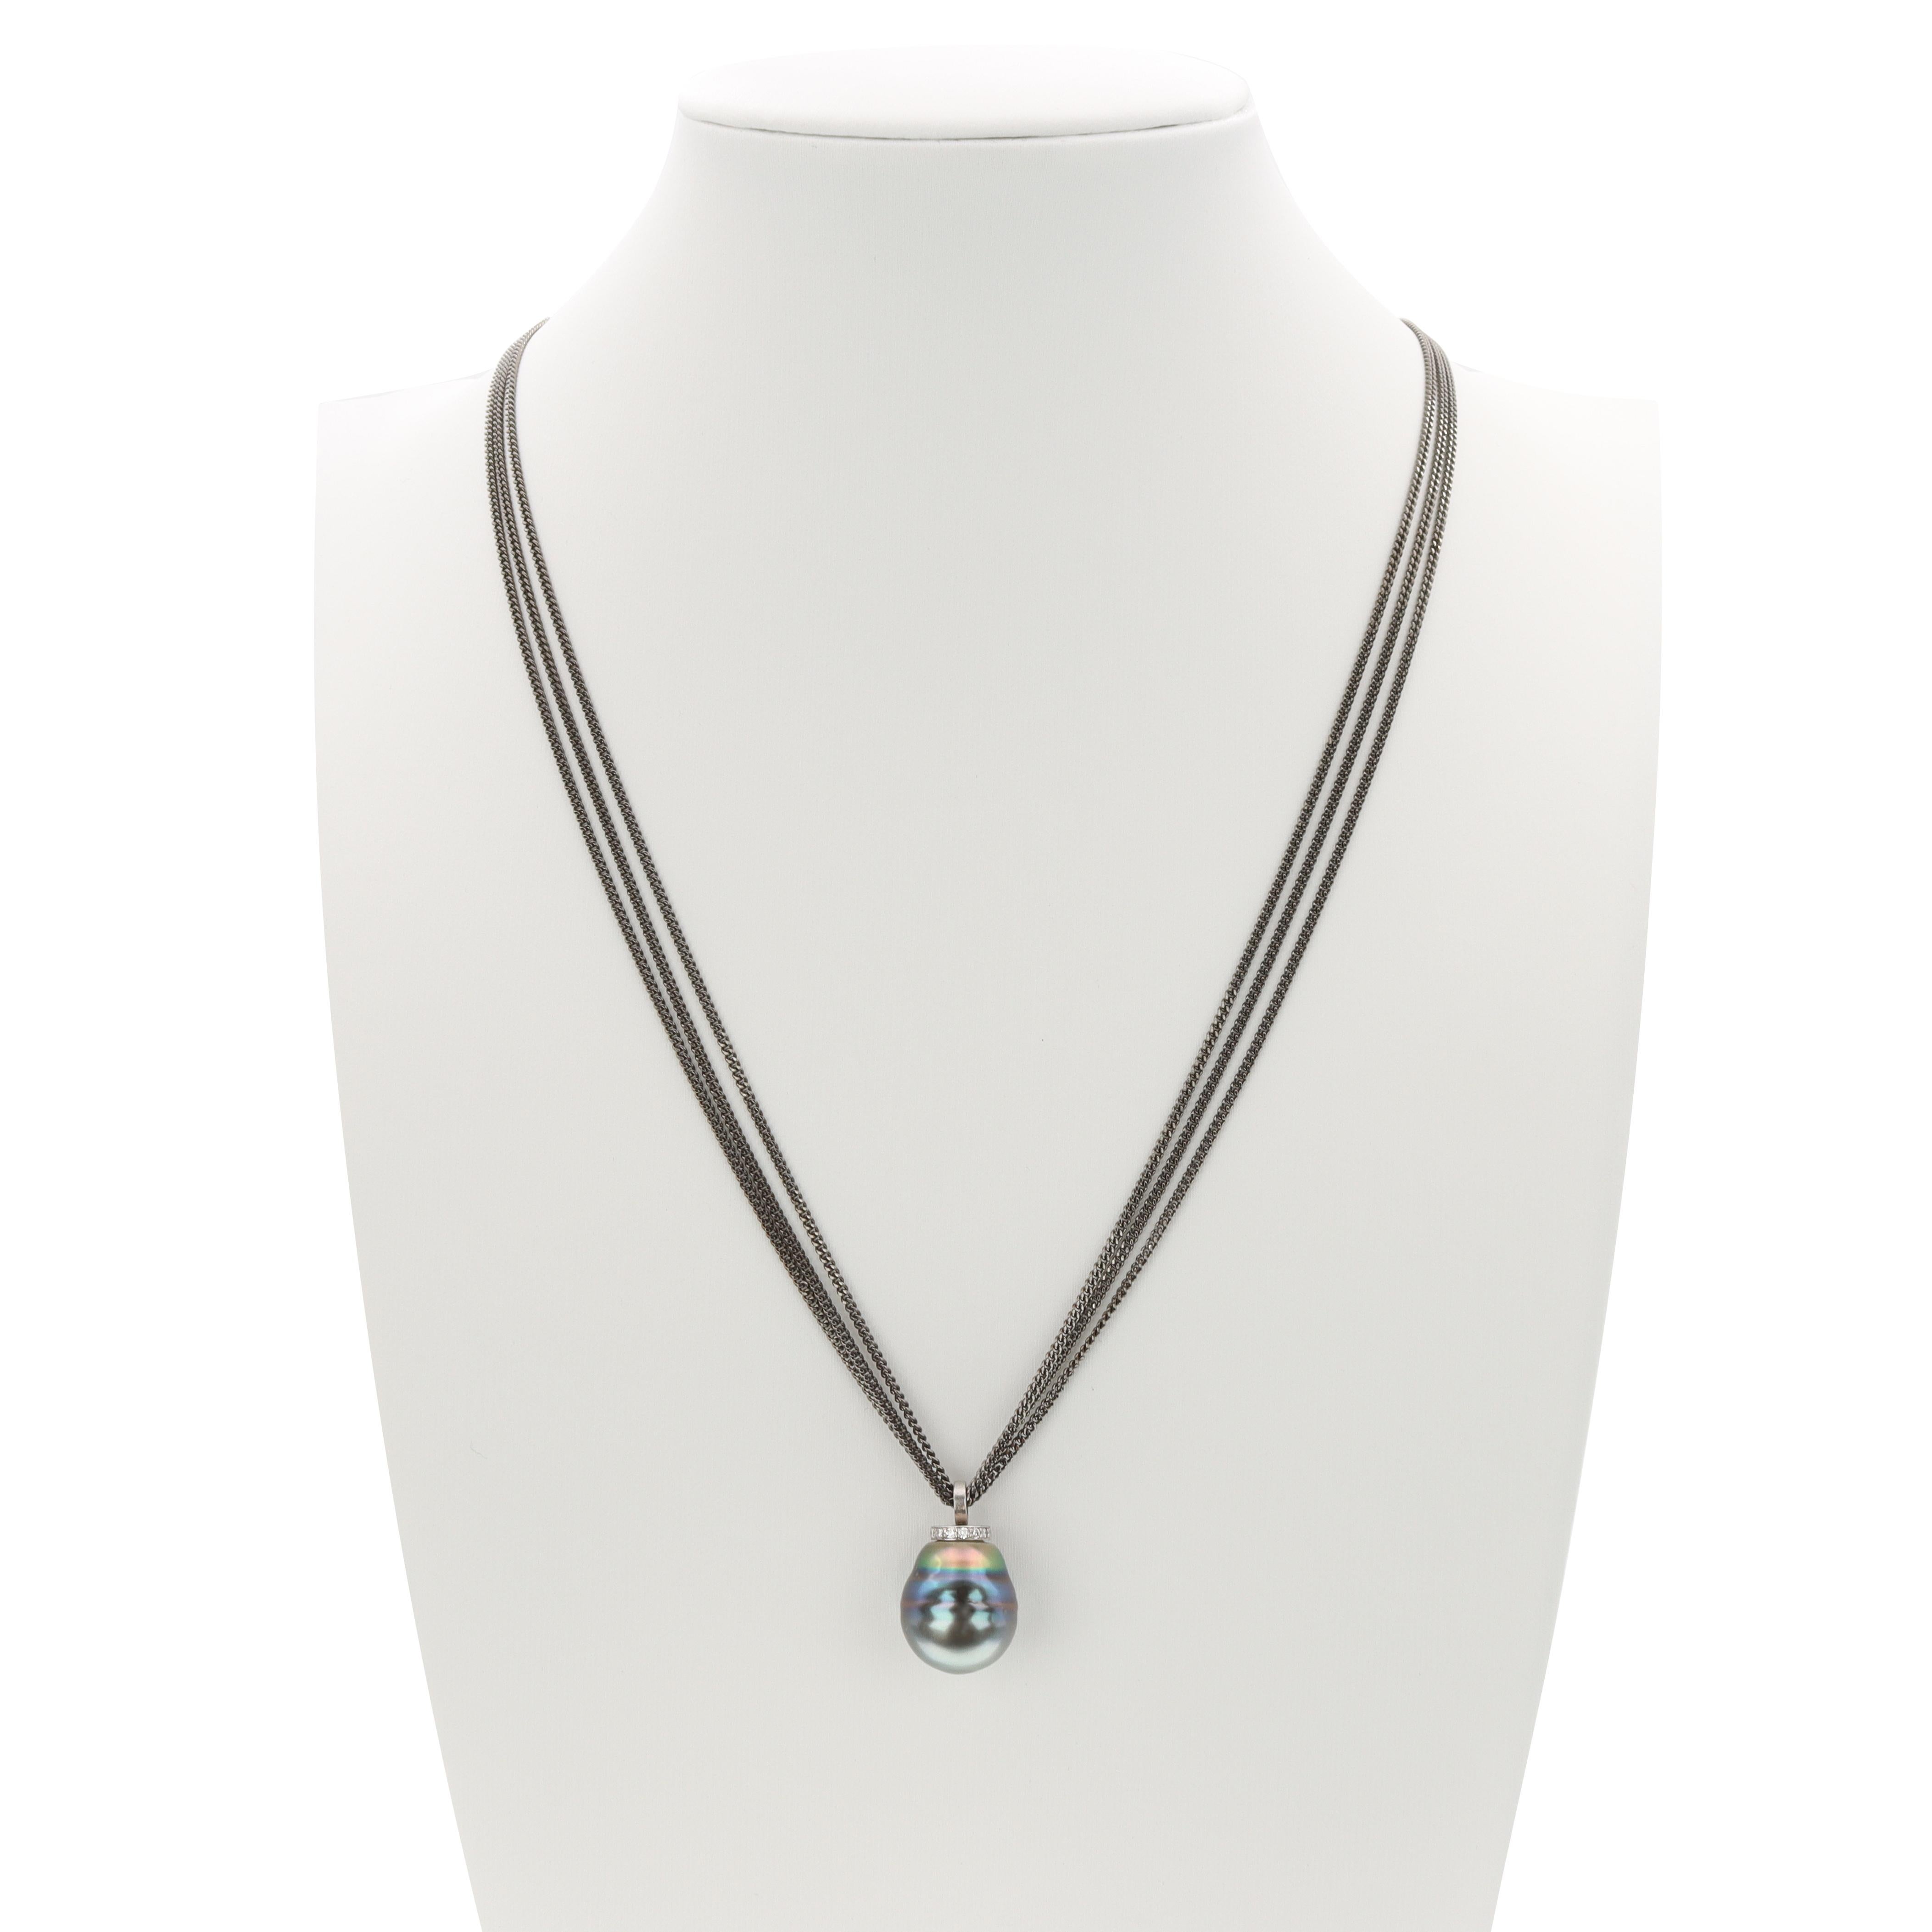 Created by Aventina-Spencer, this one-of-a-kind pendant features a 12mm Marc'Harit Conscious Circled Tahitian Pearl enhanced by 0.12 carats of round brilliant cut diamonds (G/VS), expertly set in recycled 18K white Gold. The pendant is presented on